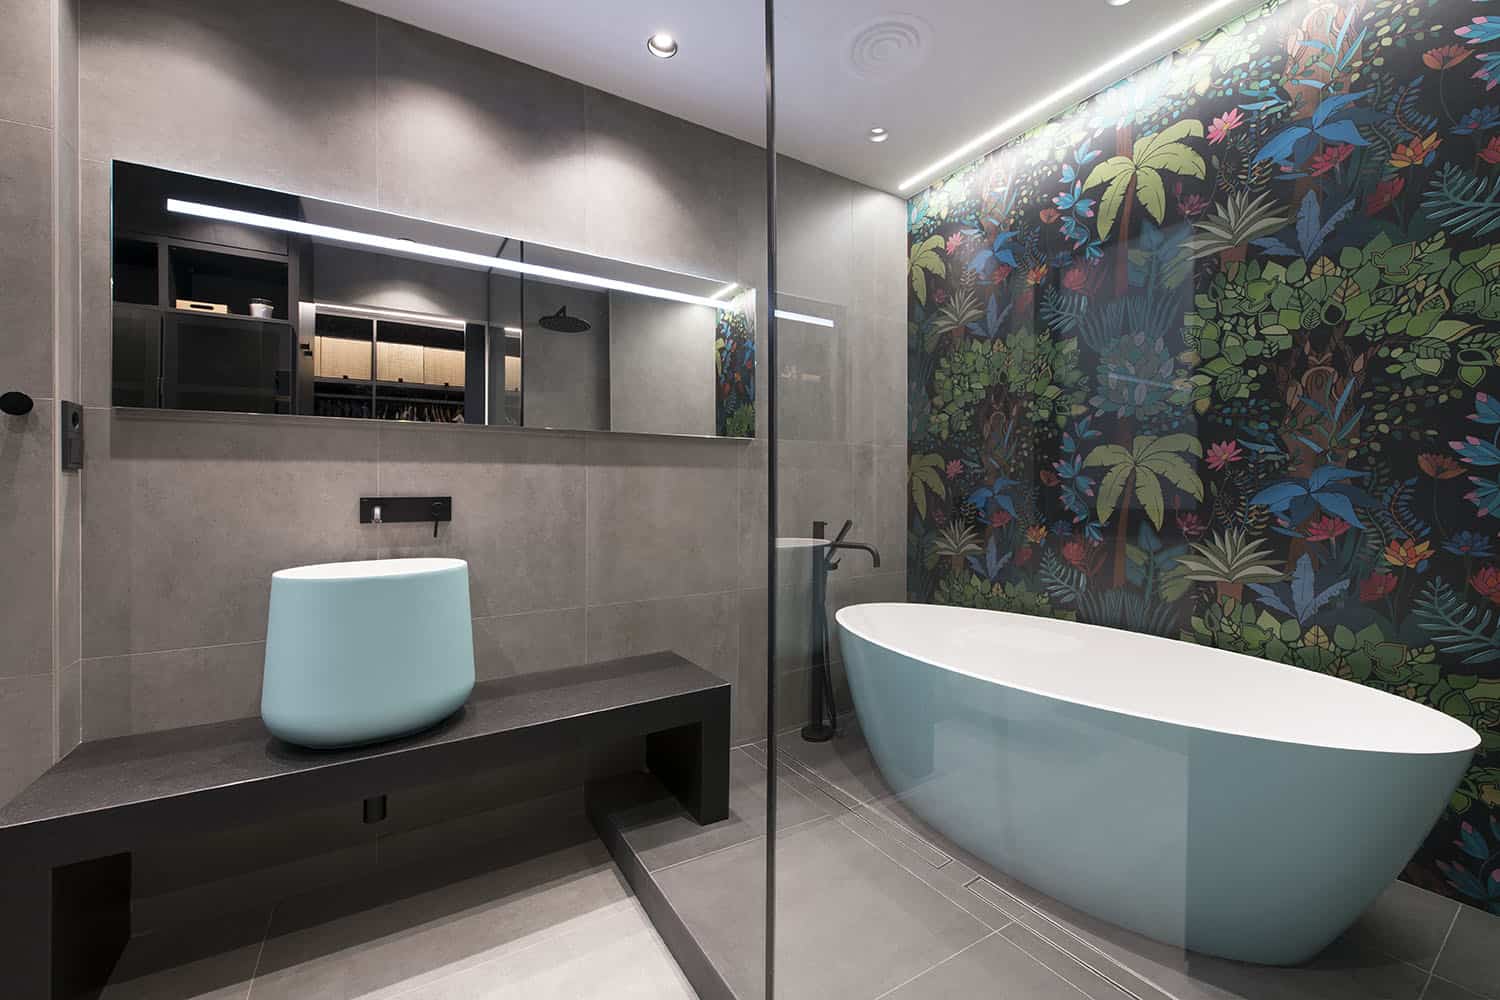 The bathroom is clad with grey tiles, a dark floral wall makes a statement and aqua appliances add to the space